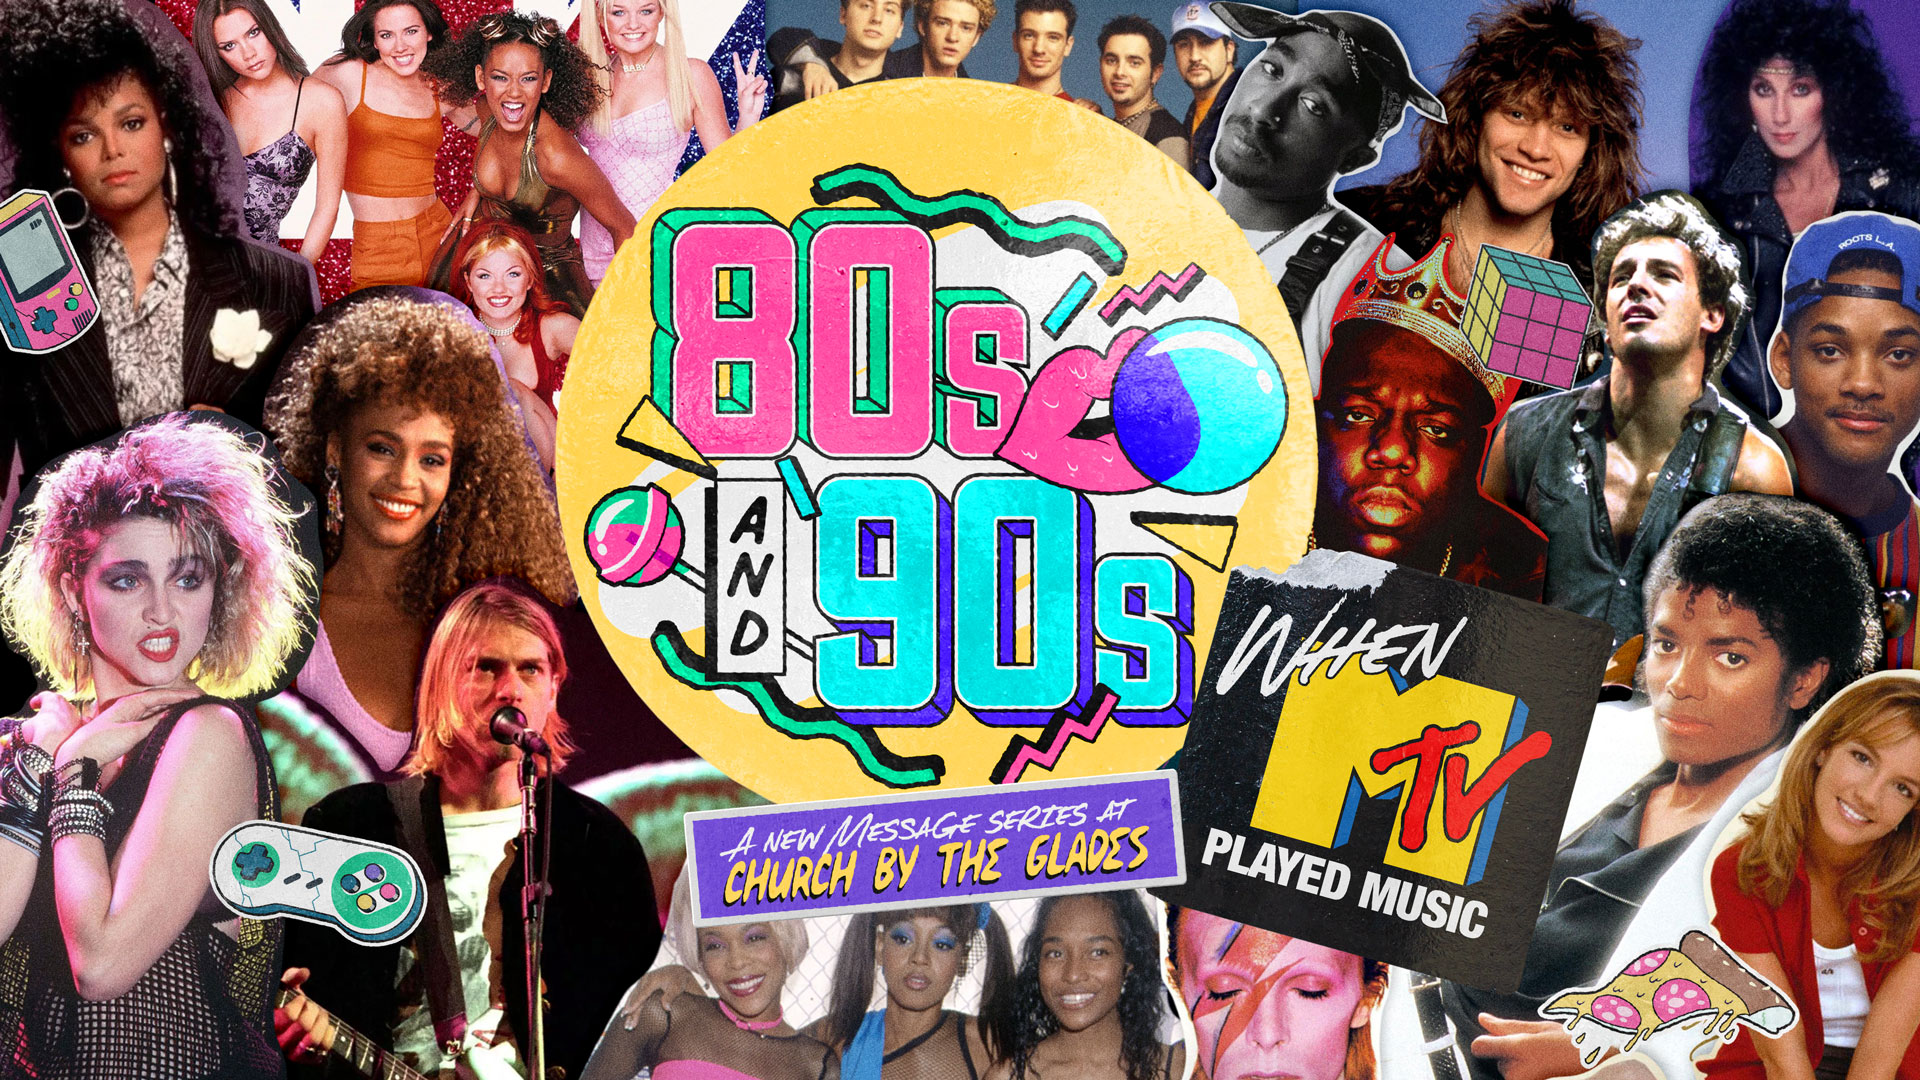   80s & 90s... When MTV played Music